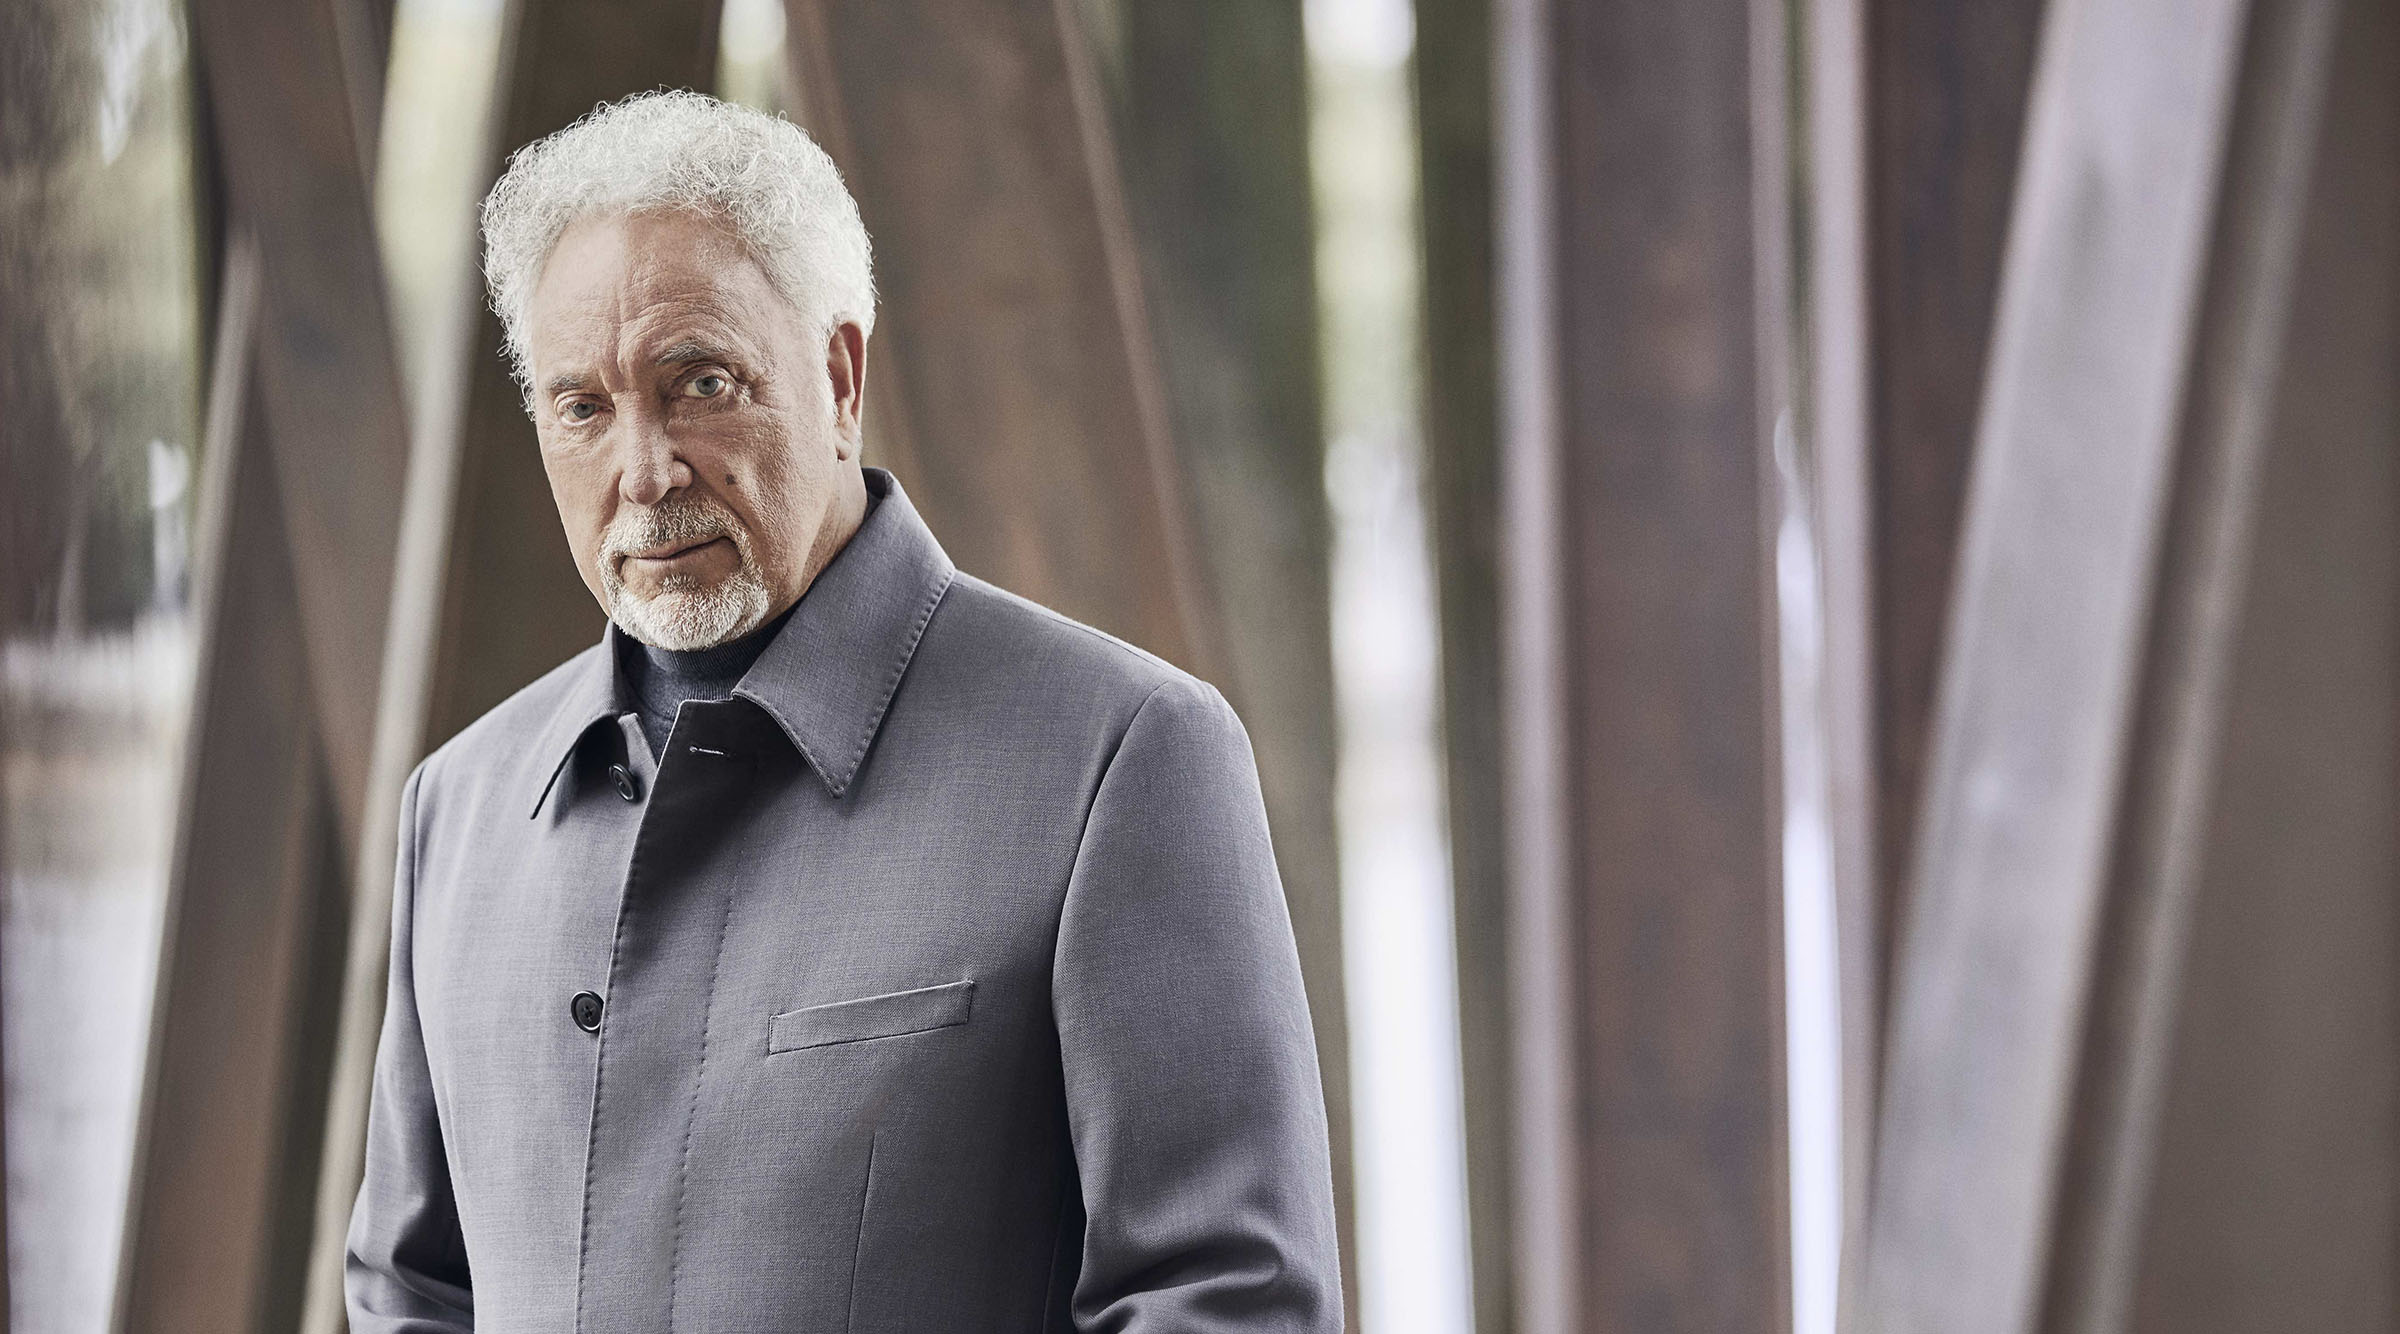 TOM JONES announces a return to Belfast with a headline show at Custom House Square on Tuesday 10th August 2021 